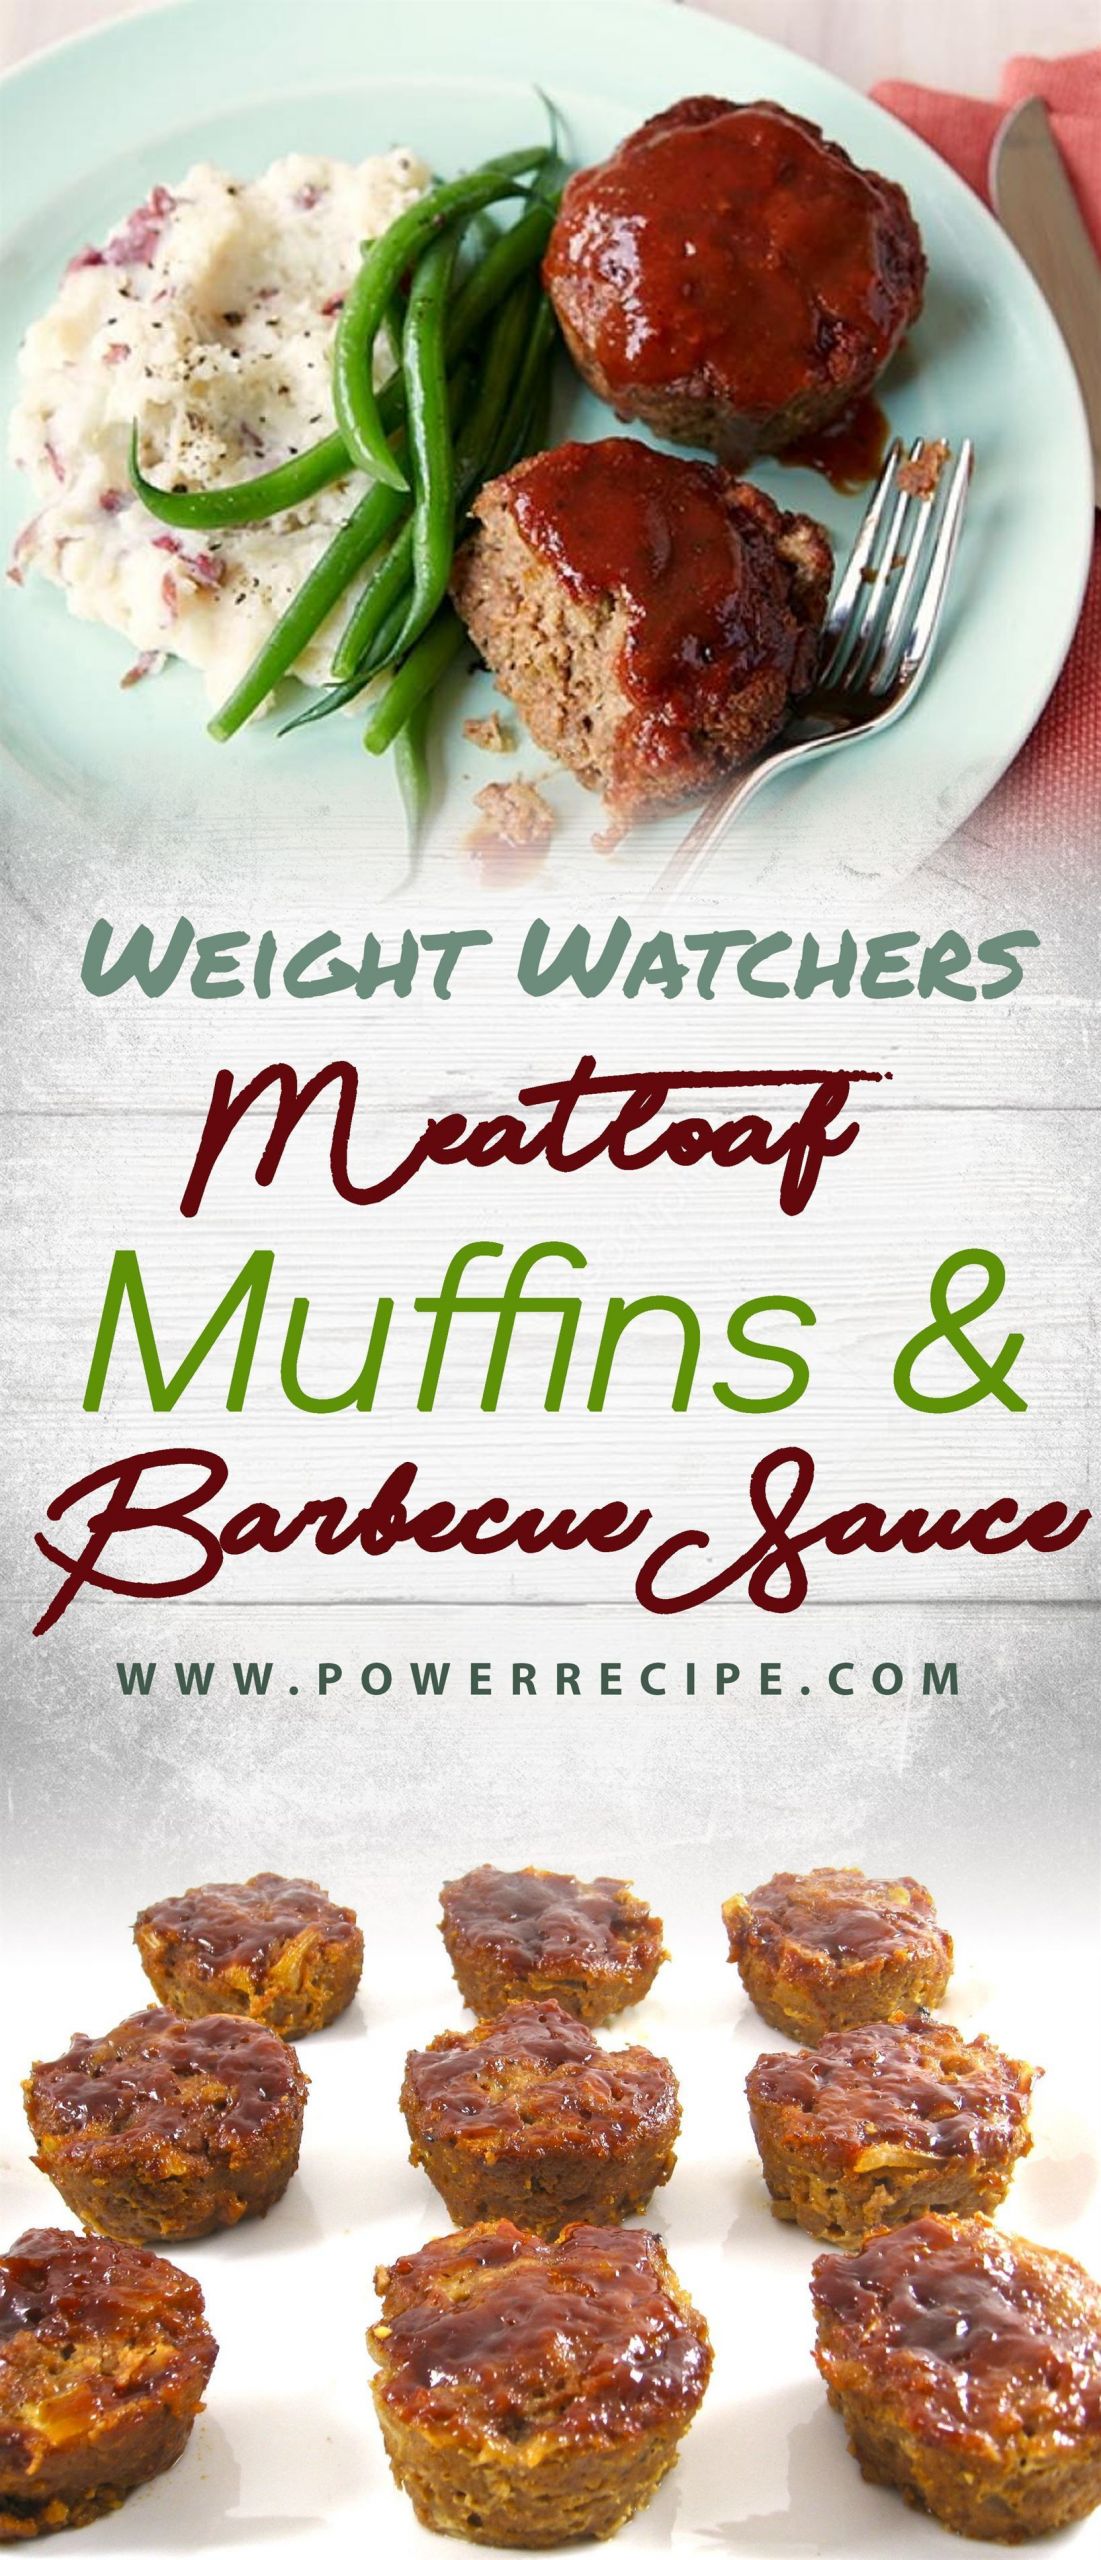 Weight Watchers Meatloaf Muffins
 Pin on WEIGHT WATCHERS